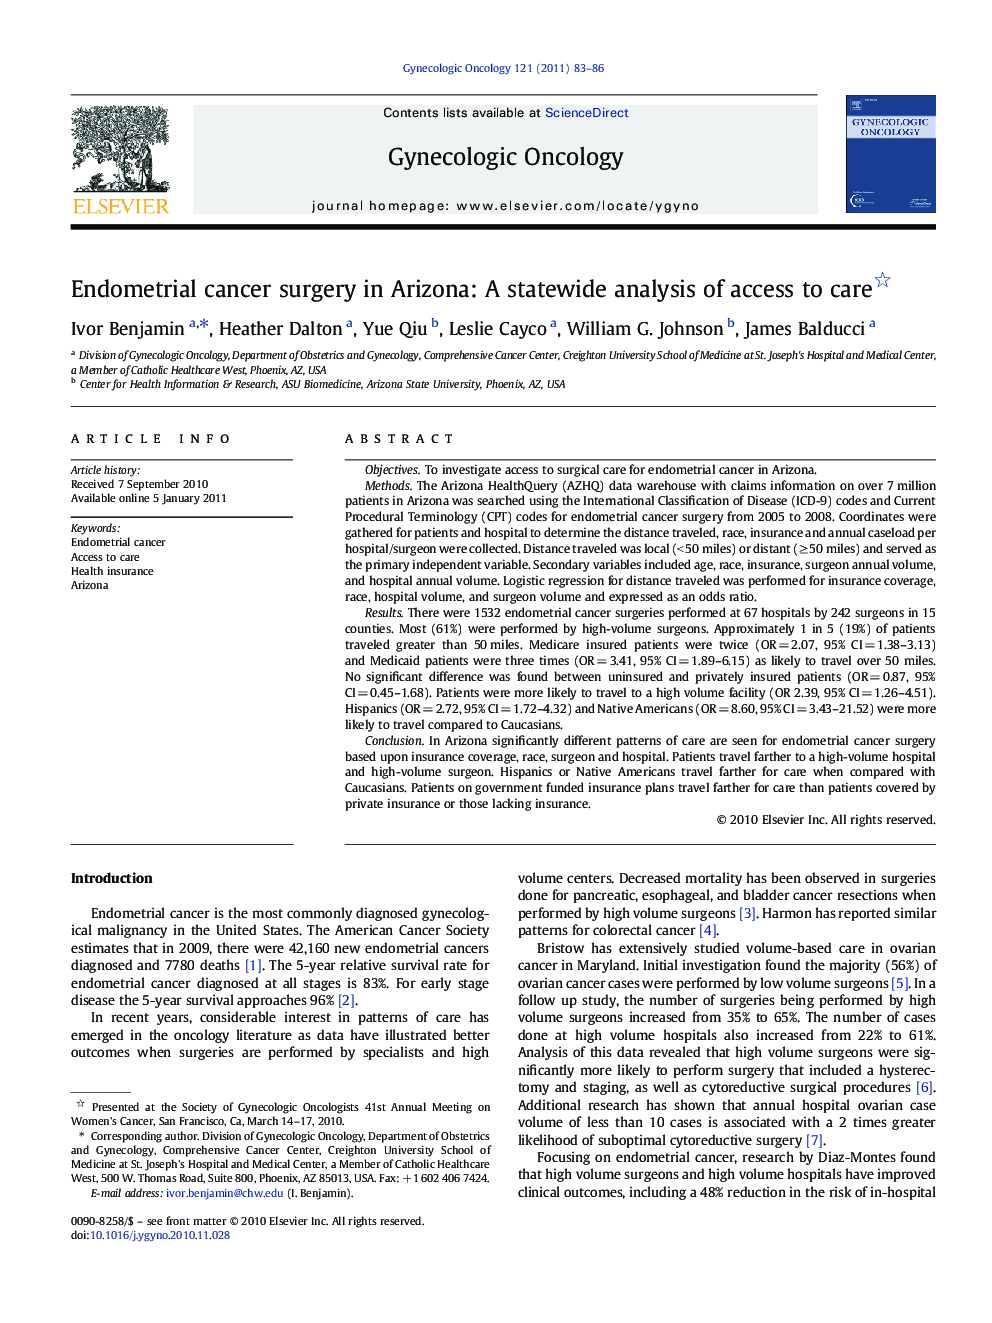 Endometrial cancer surgery in Arizona: A statewide analysis of access to care